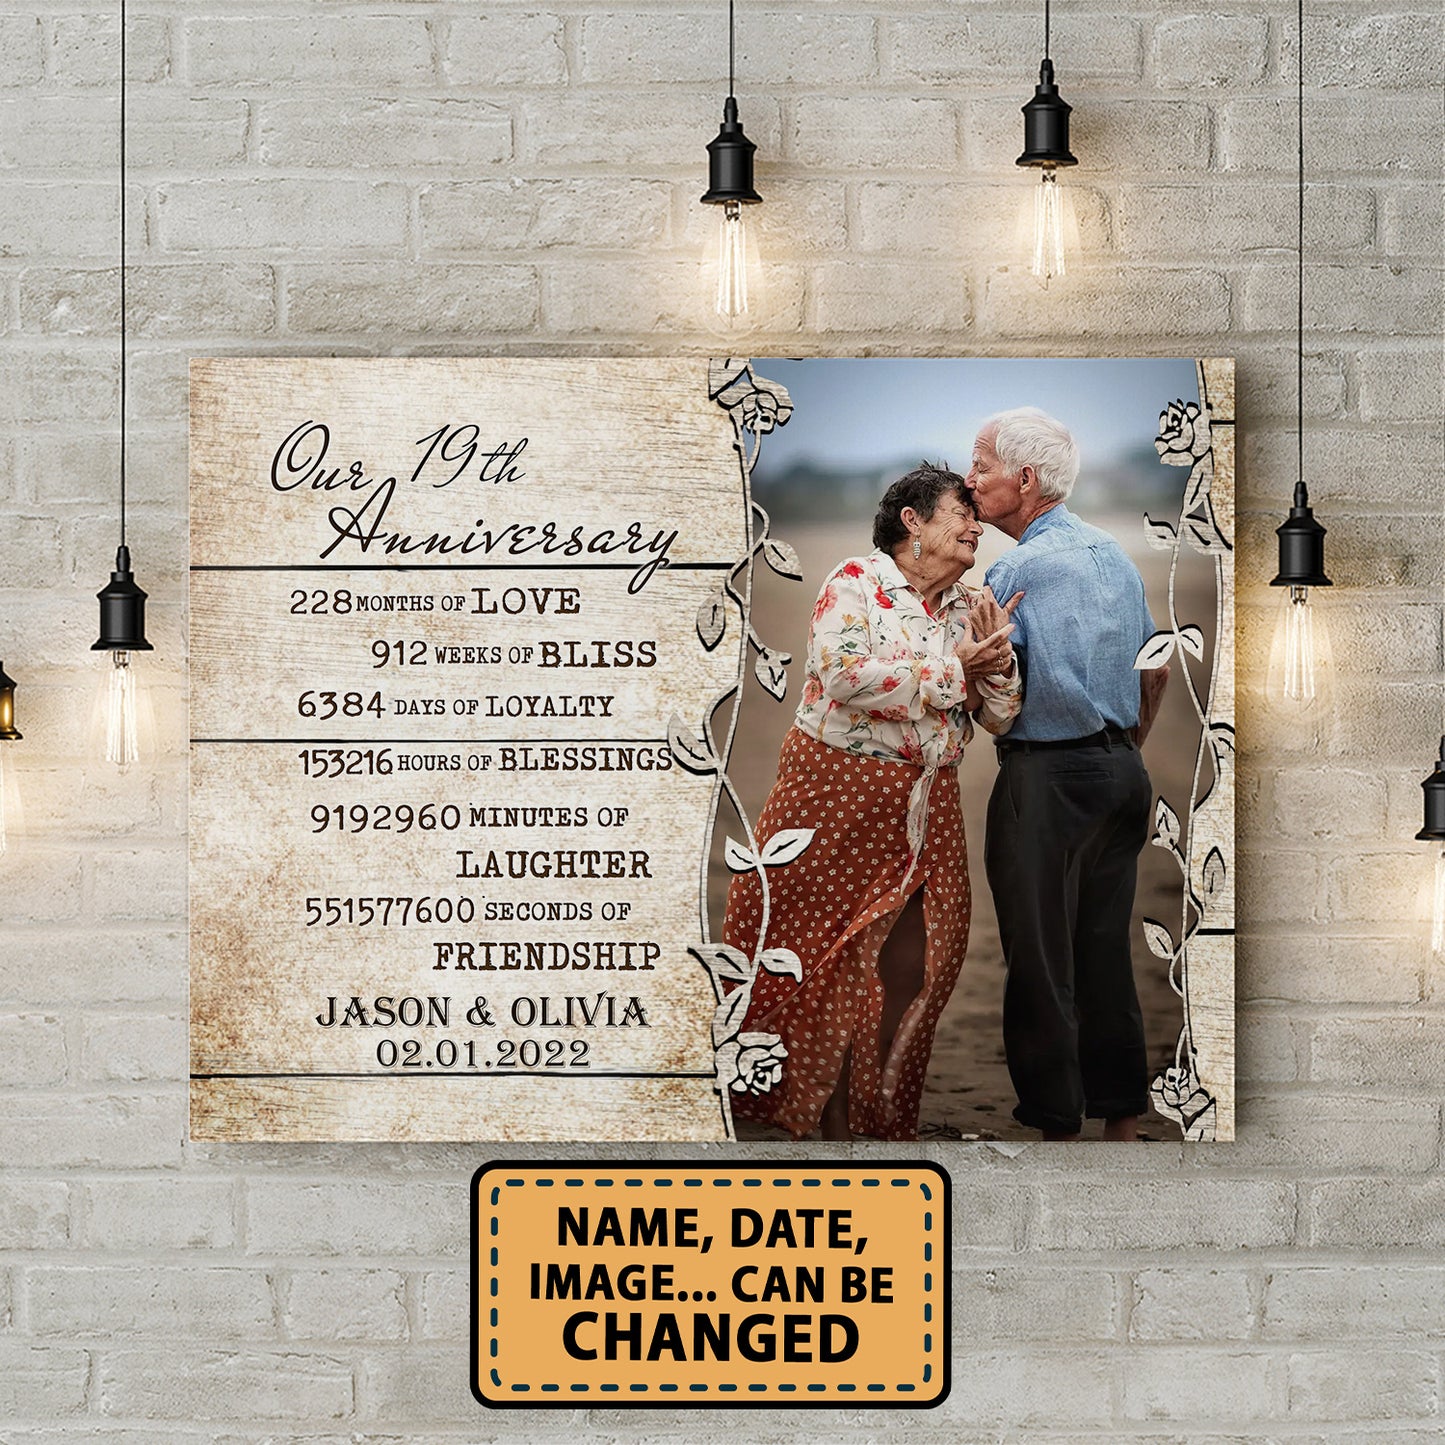 Our 19th Anniversary Timeless love Valentine Gift Personalized Canvas